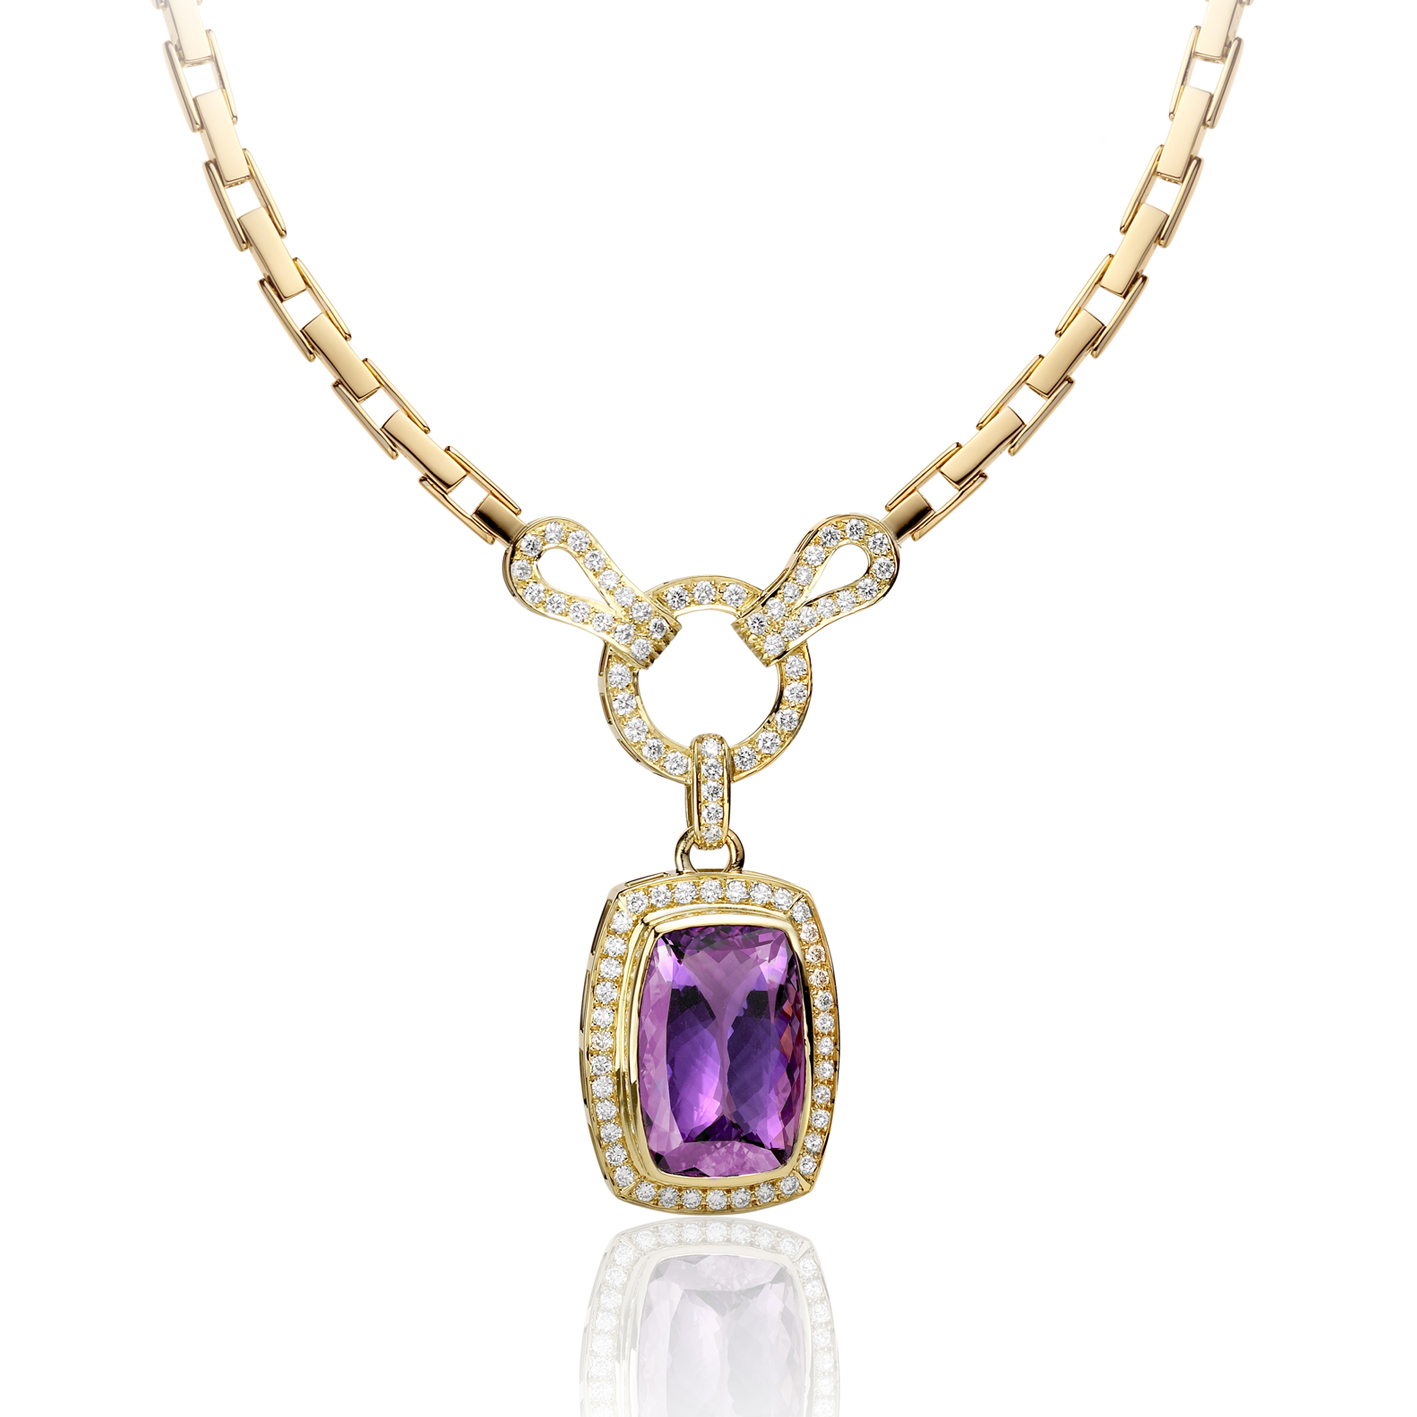 Superb amethyst and diamond necklace